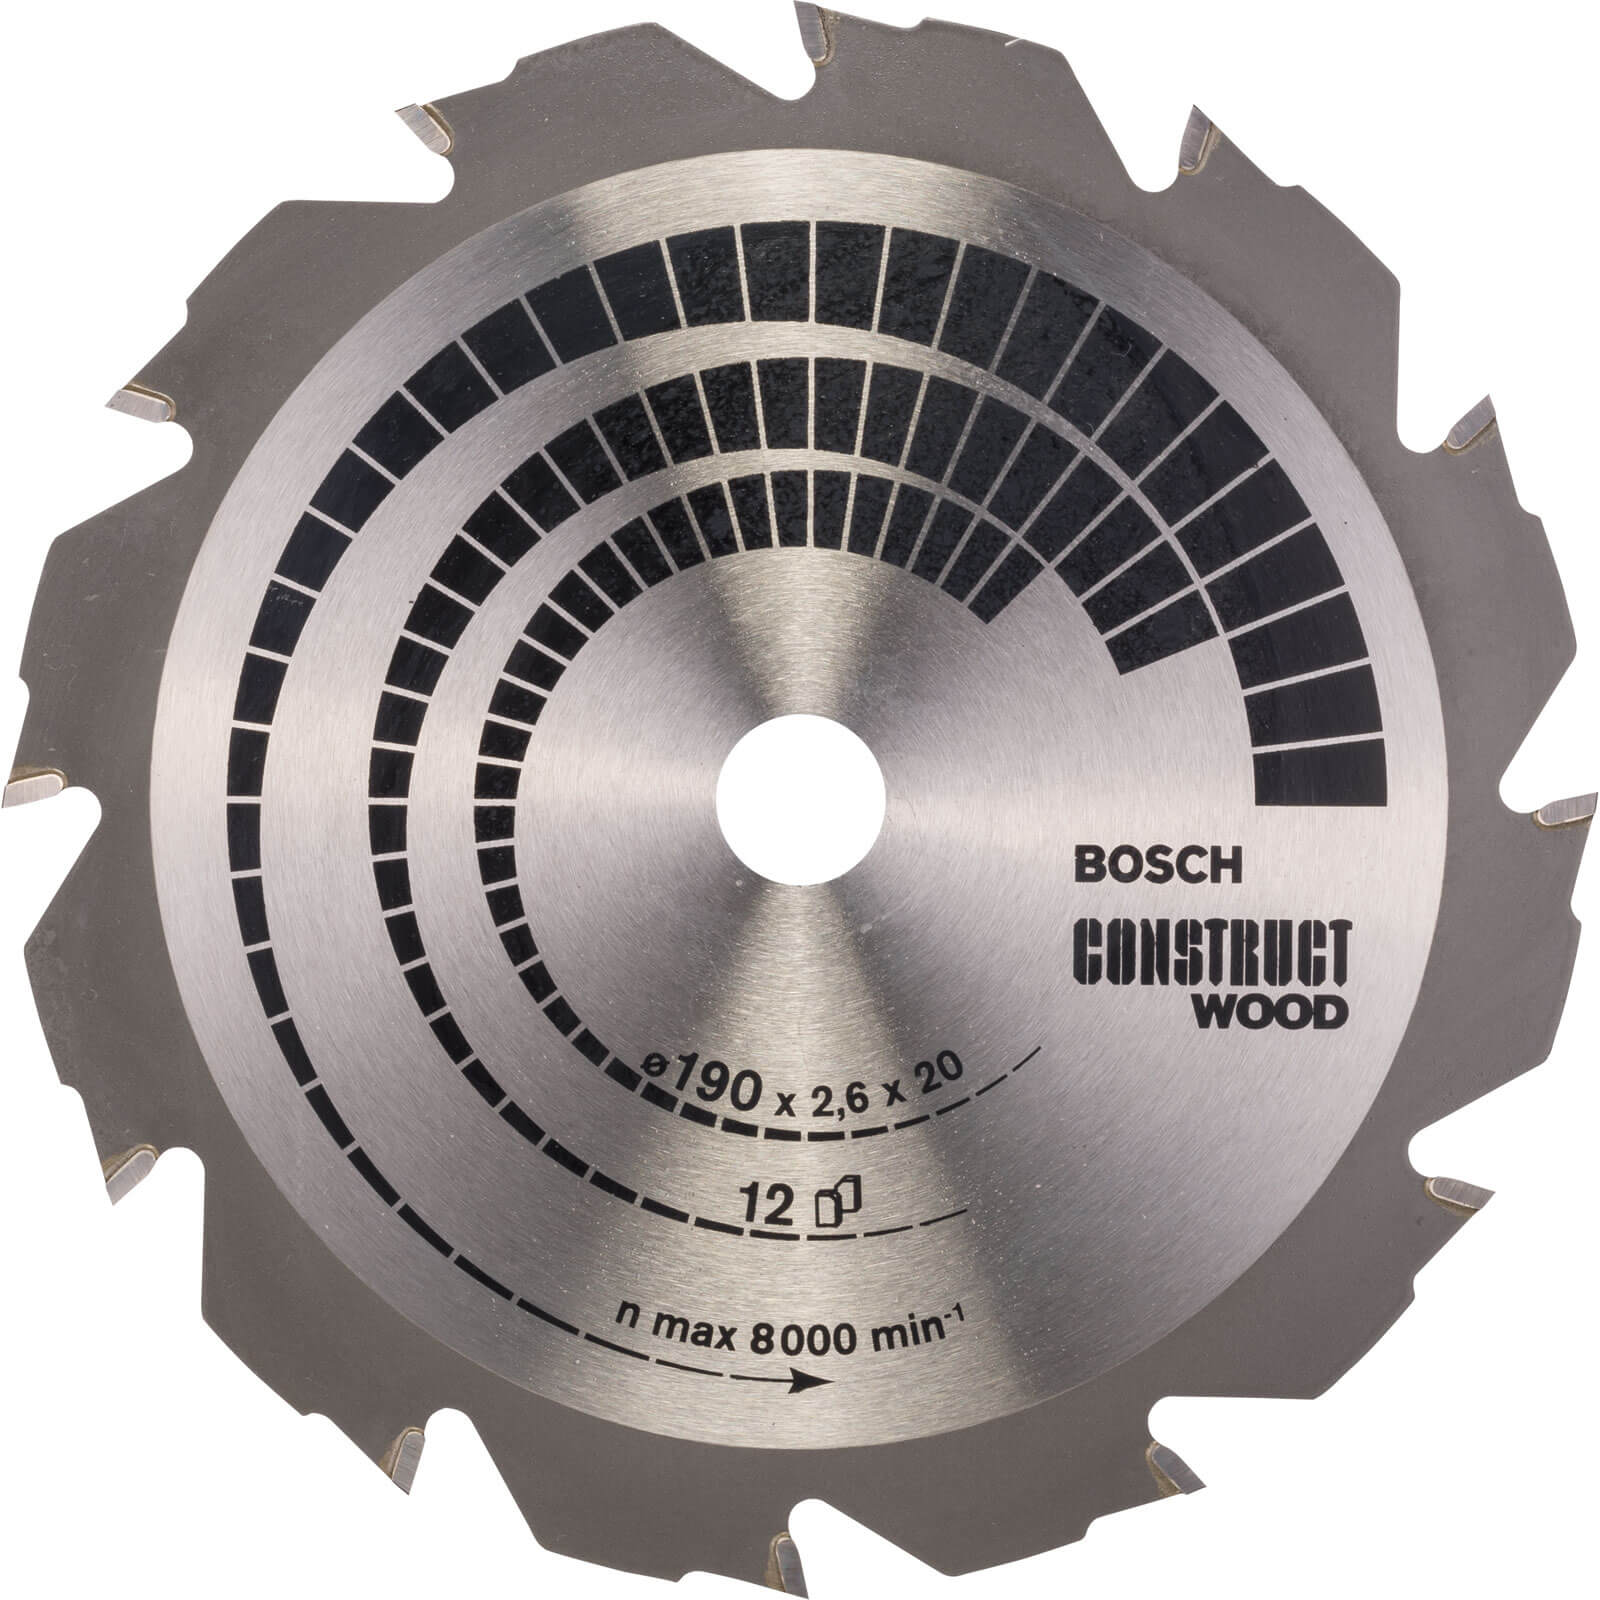 Photos - Power Tool Accessory Bosch Construct Wood Cutting Saw Blade 190mm 12T 20mm 